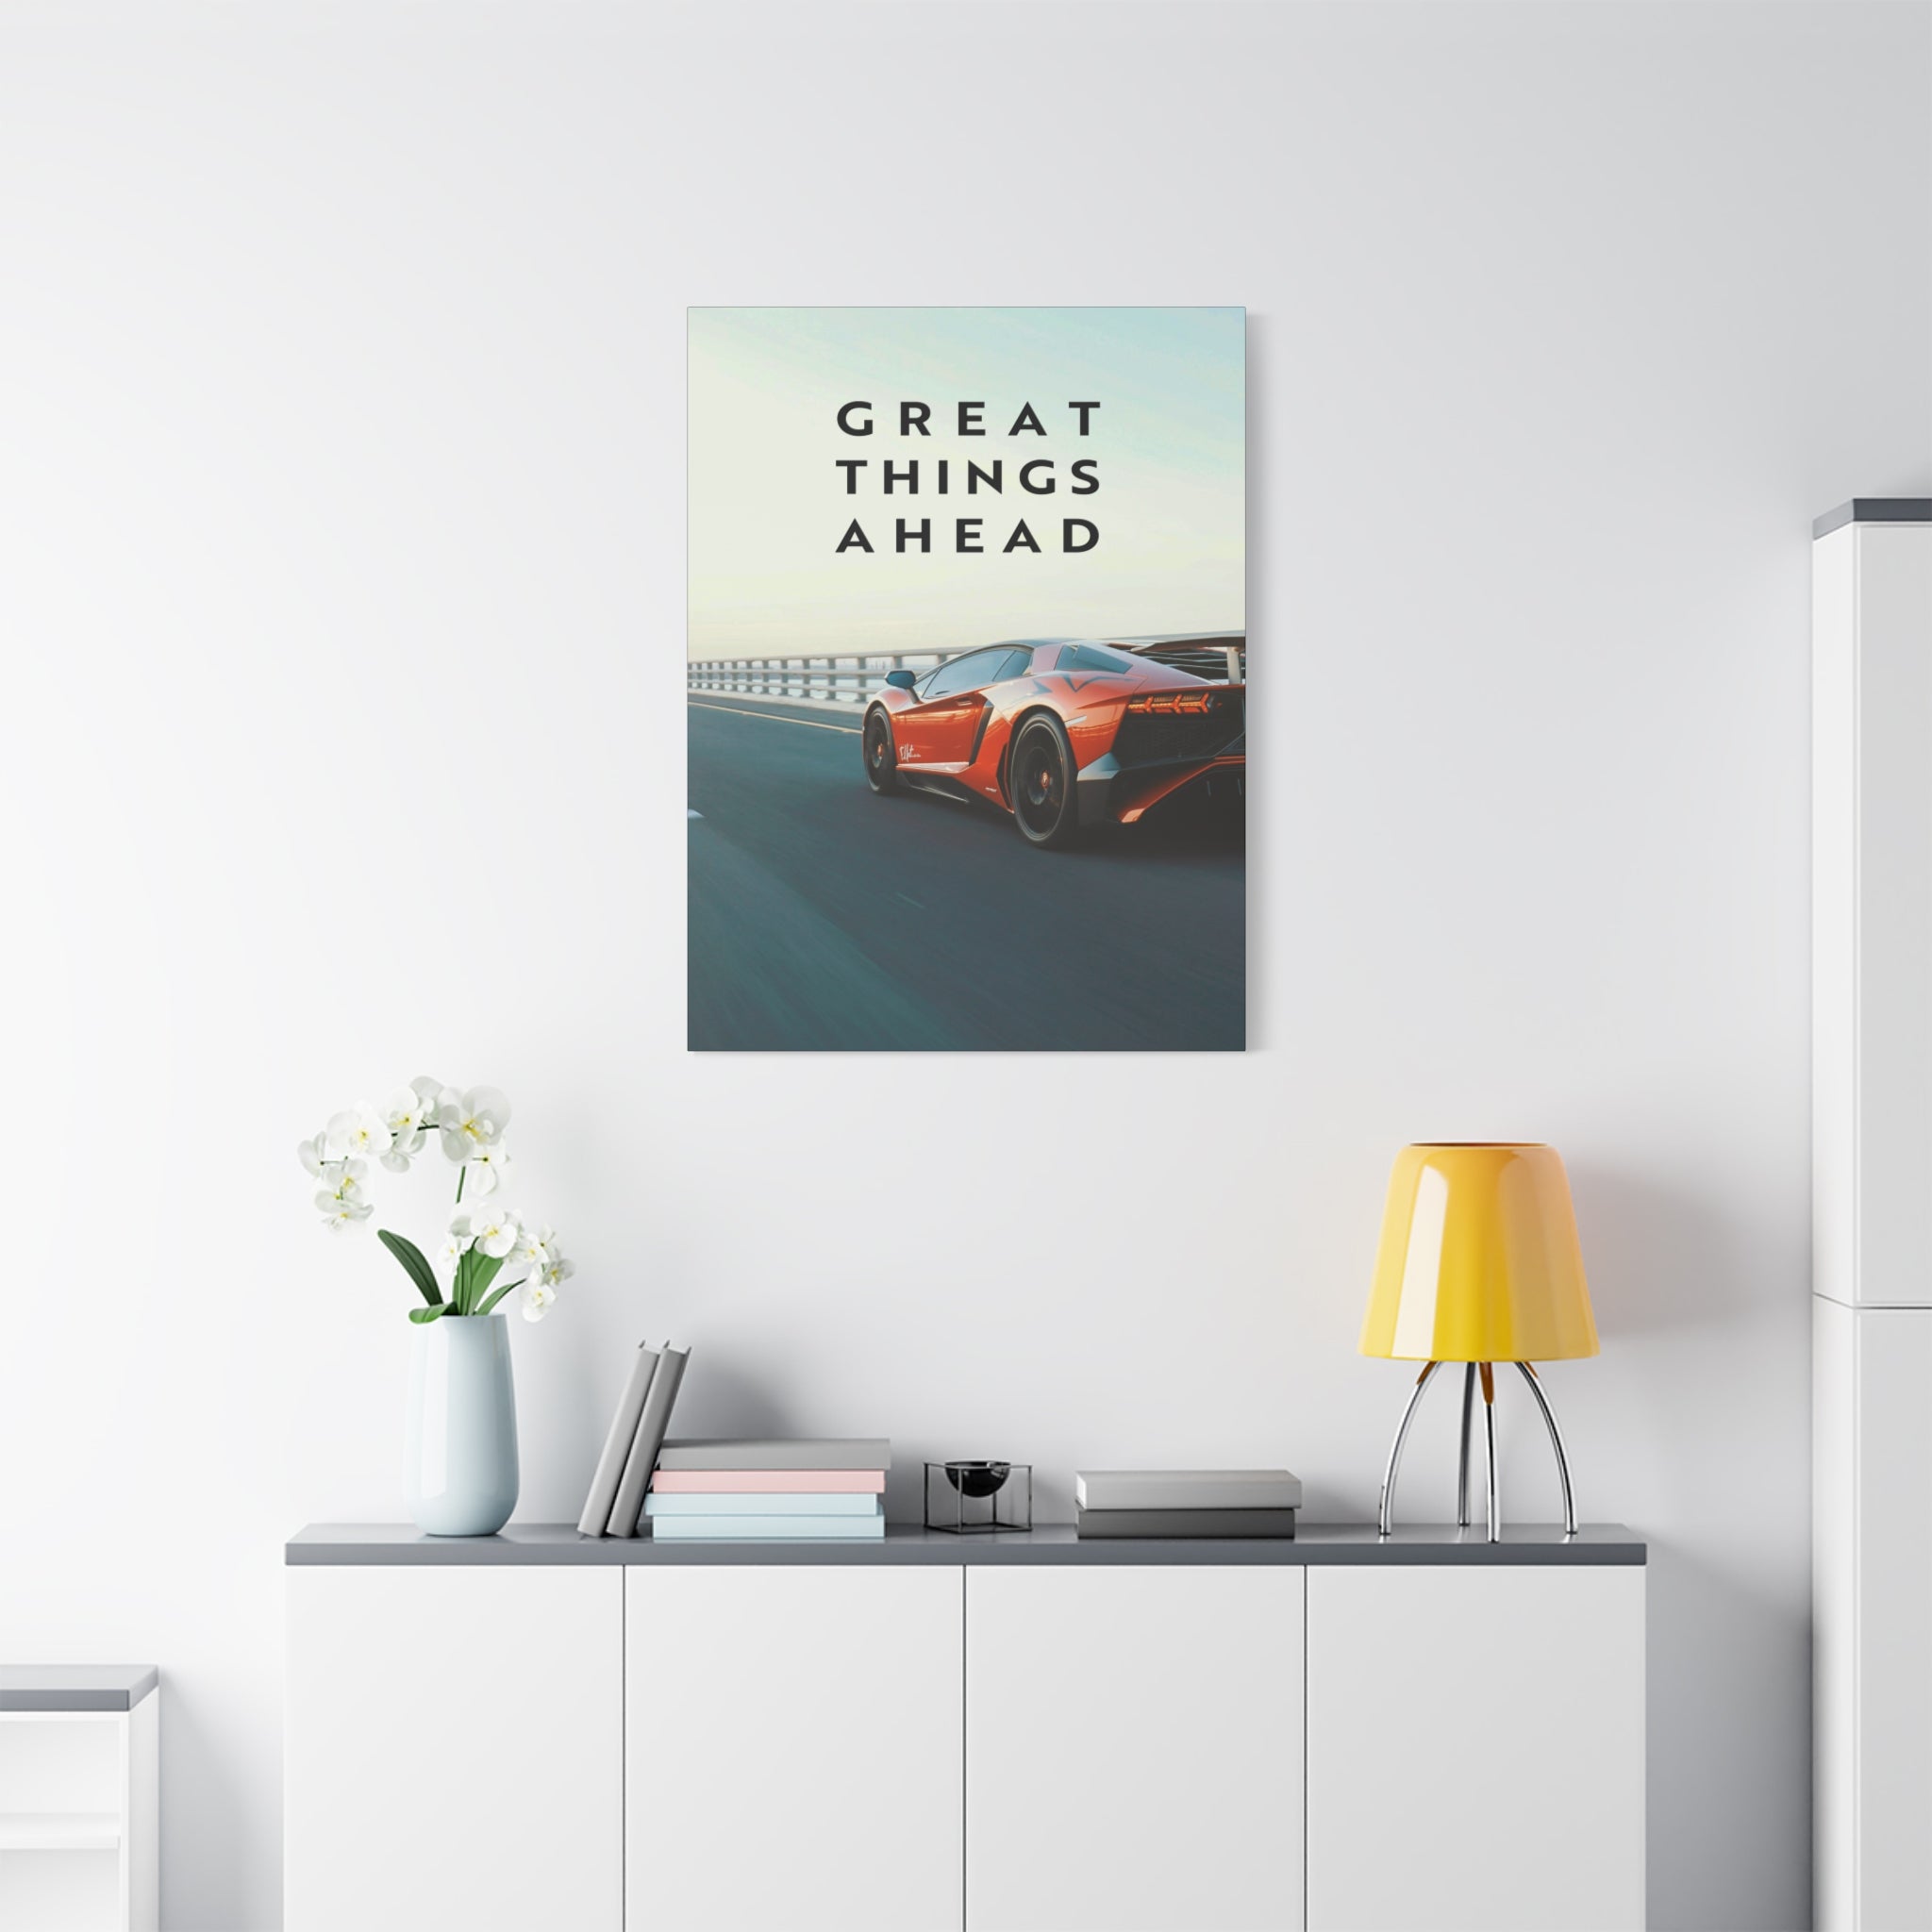 Great Things Ahead - Sports Car - Wall Art additional image 2